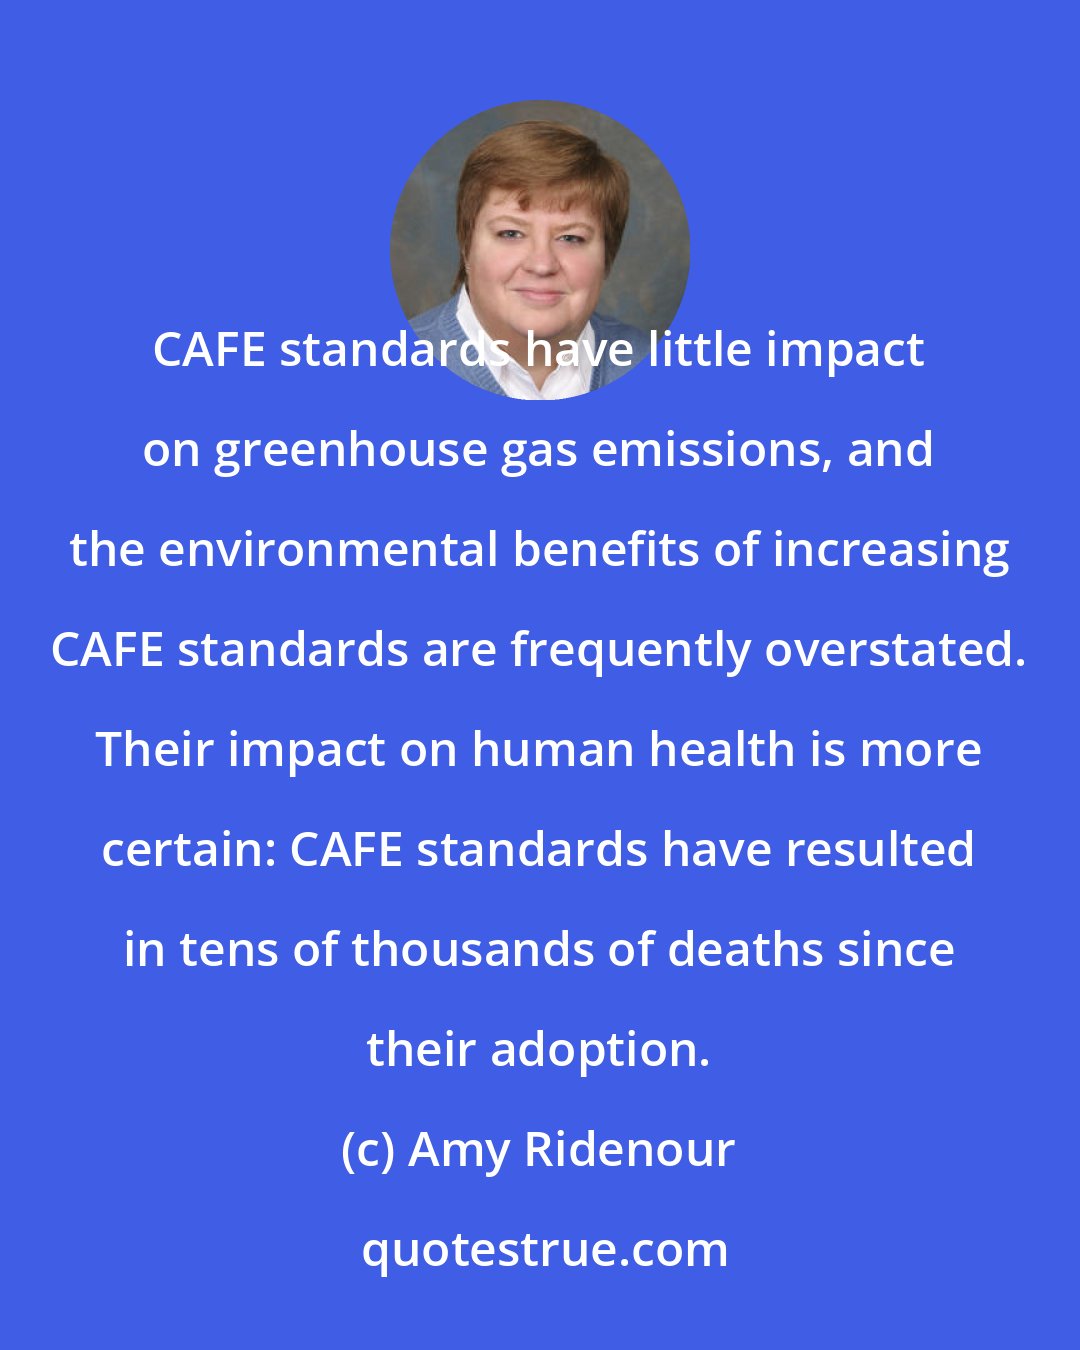 Amy Ridenour: CAFE standards have little impact on greenhouse gas emissions, and the environmental benefits of increasing CAFE standards are frequently overstated. Their impact on human health is more certain: CAFE standards have resulted in tens of thousands of deaths since their adoption.